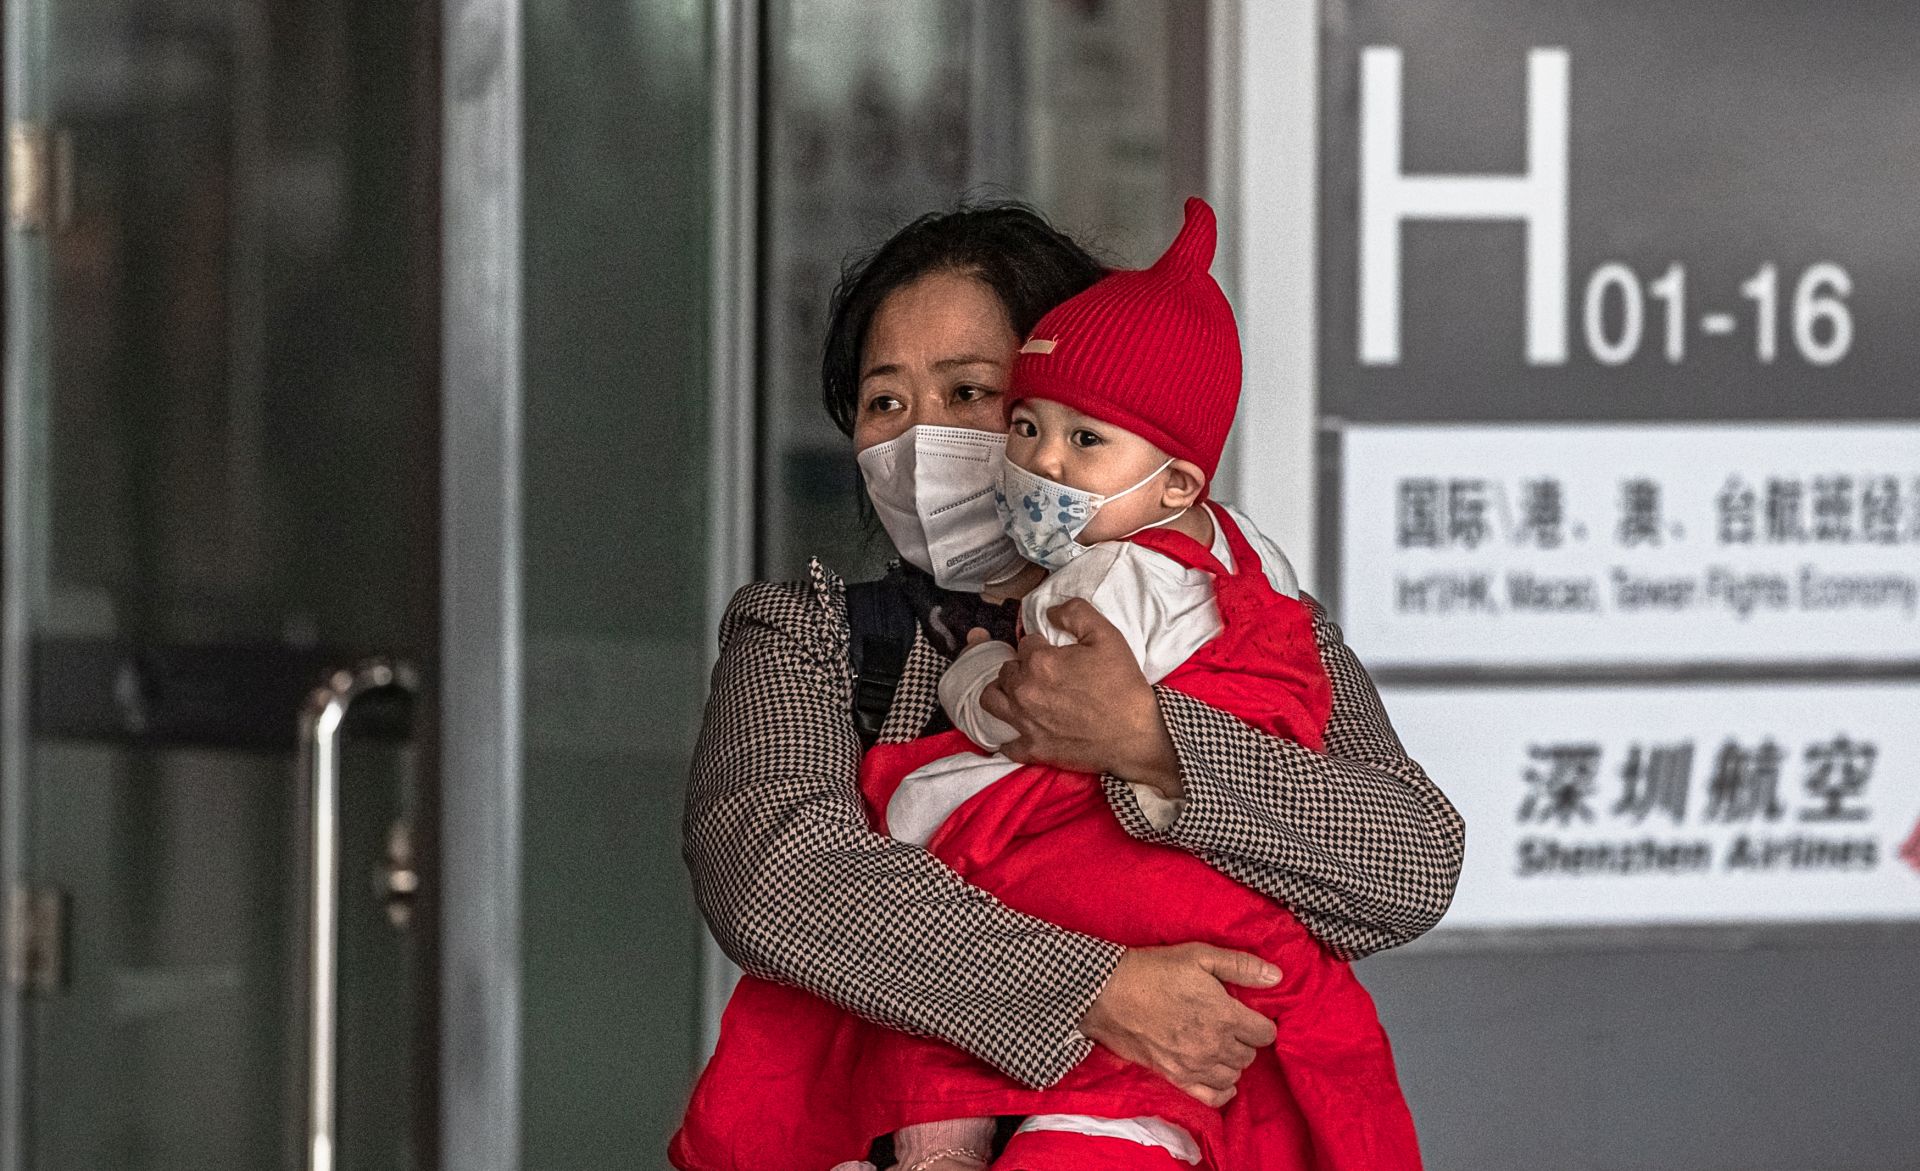 epa08300650 A woman carries a child wearing a protective face mask at the Capital International Airport, in Beijing, China, 17 March 2020. According to media reports, Beijing enforced a 14-day quarantine on international travellers arriving in China's capital. All passengers arriving from abroad go through the screening at the transfer center from where most of them are transferred in designated quarantine facilities.  EPA/ROMAN PILIPEY